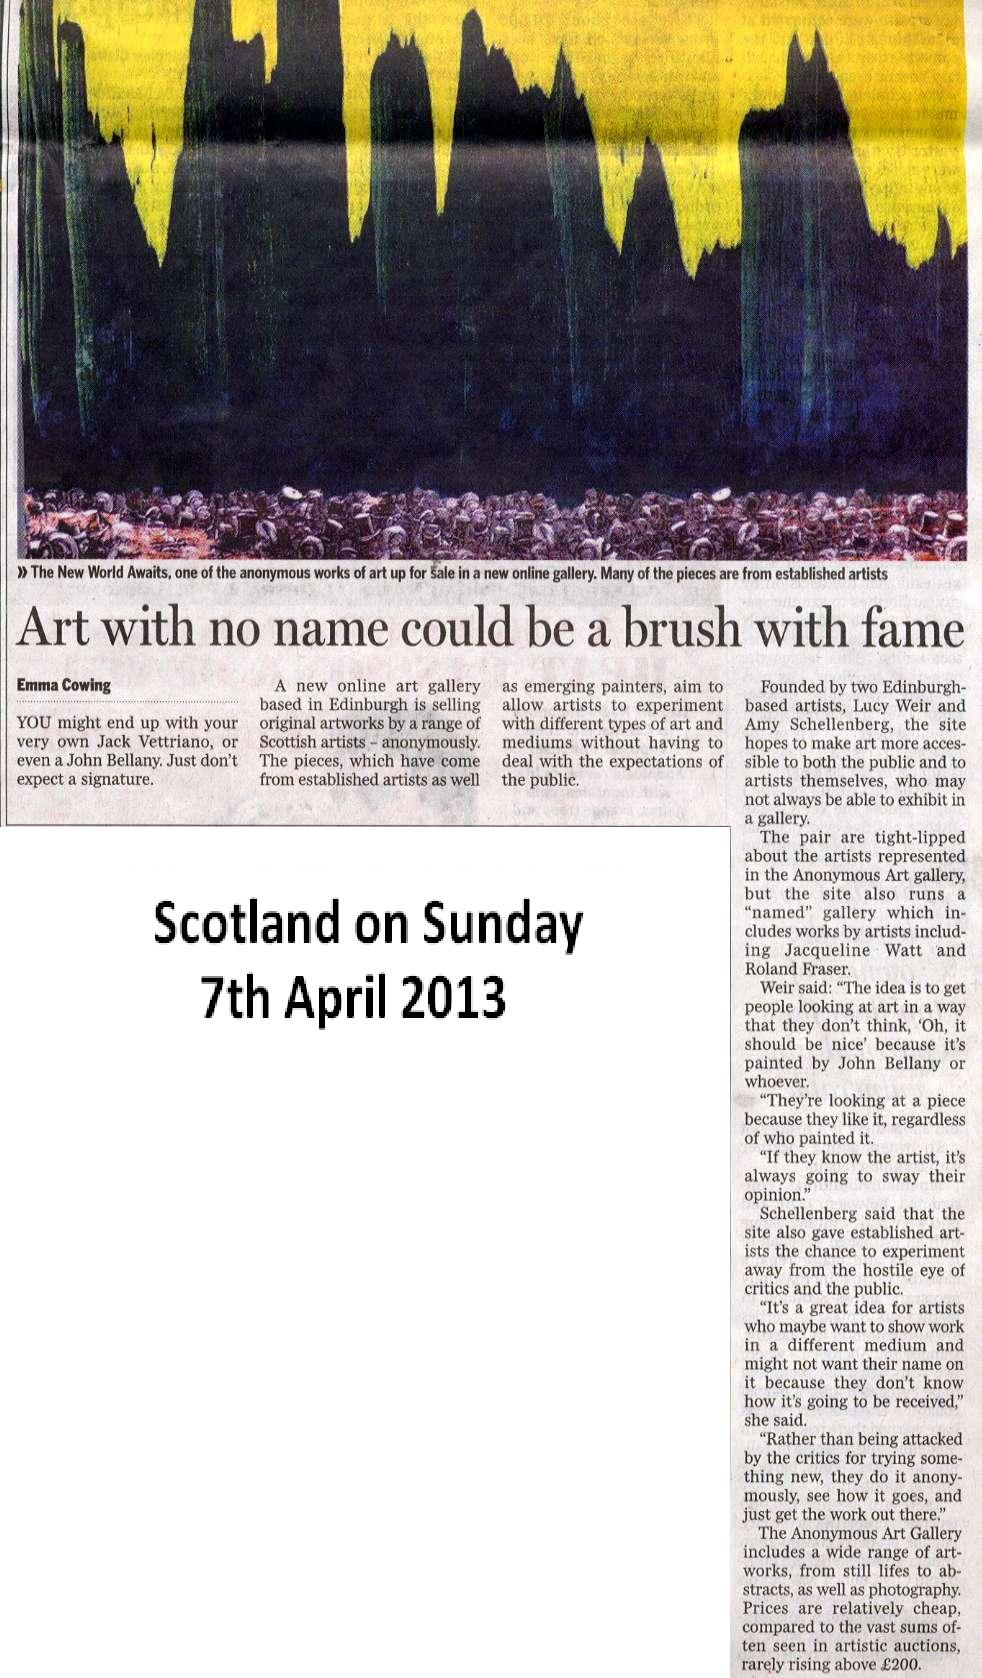 Copy of the Scotland on Sunday article 